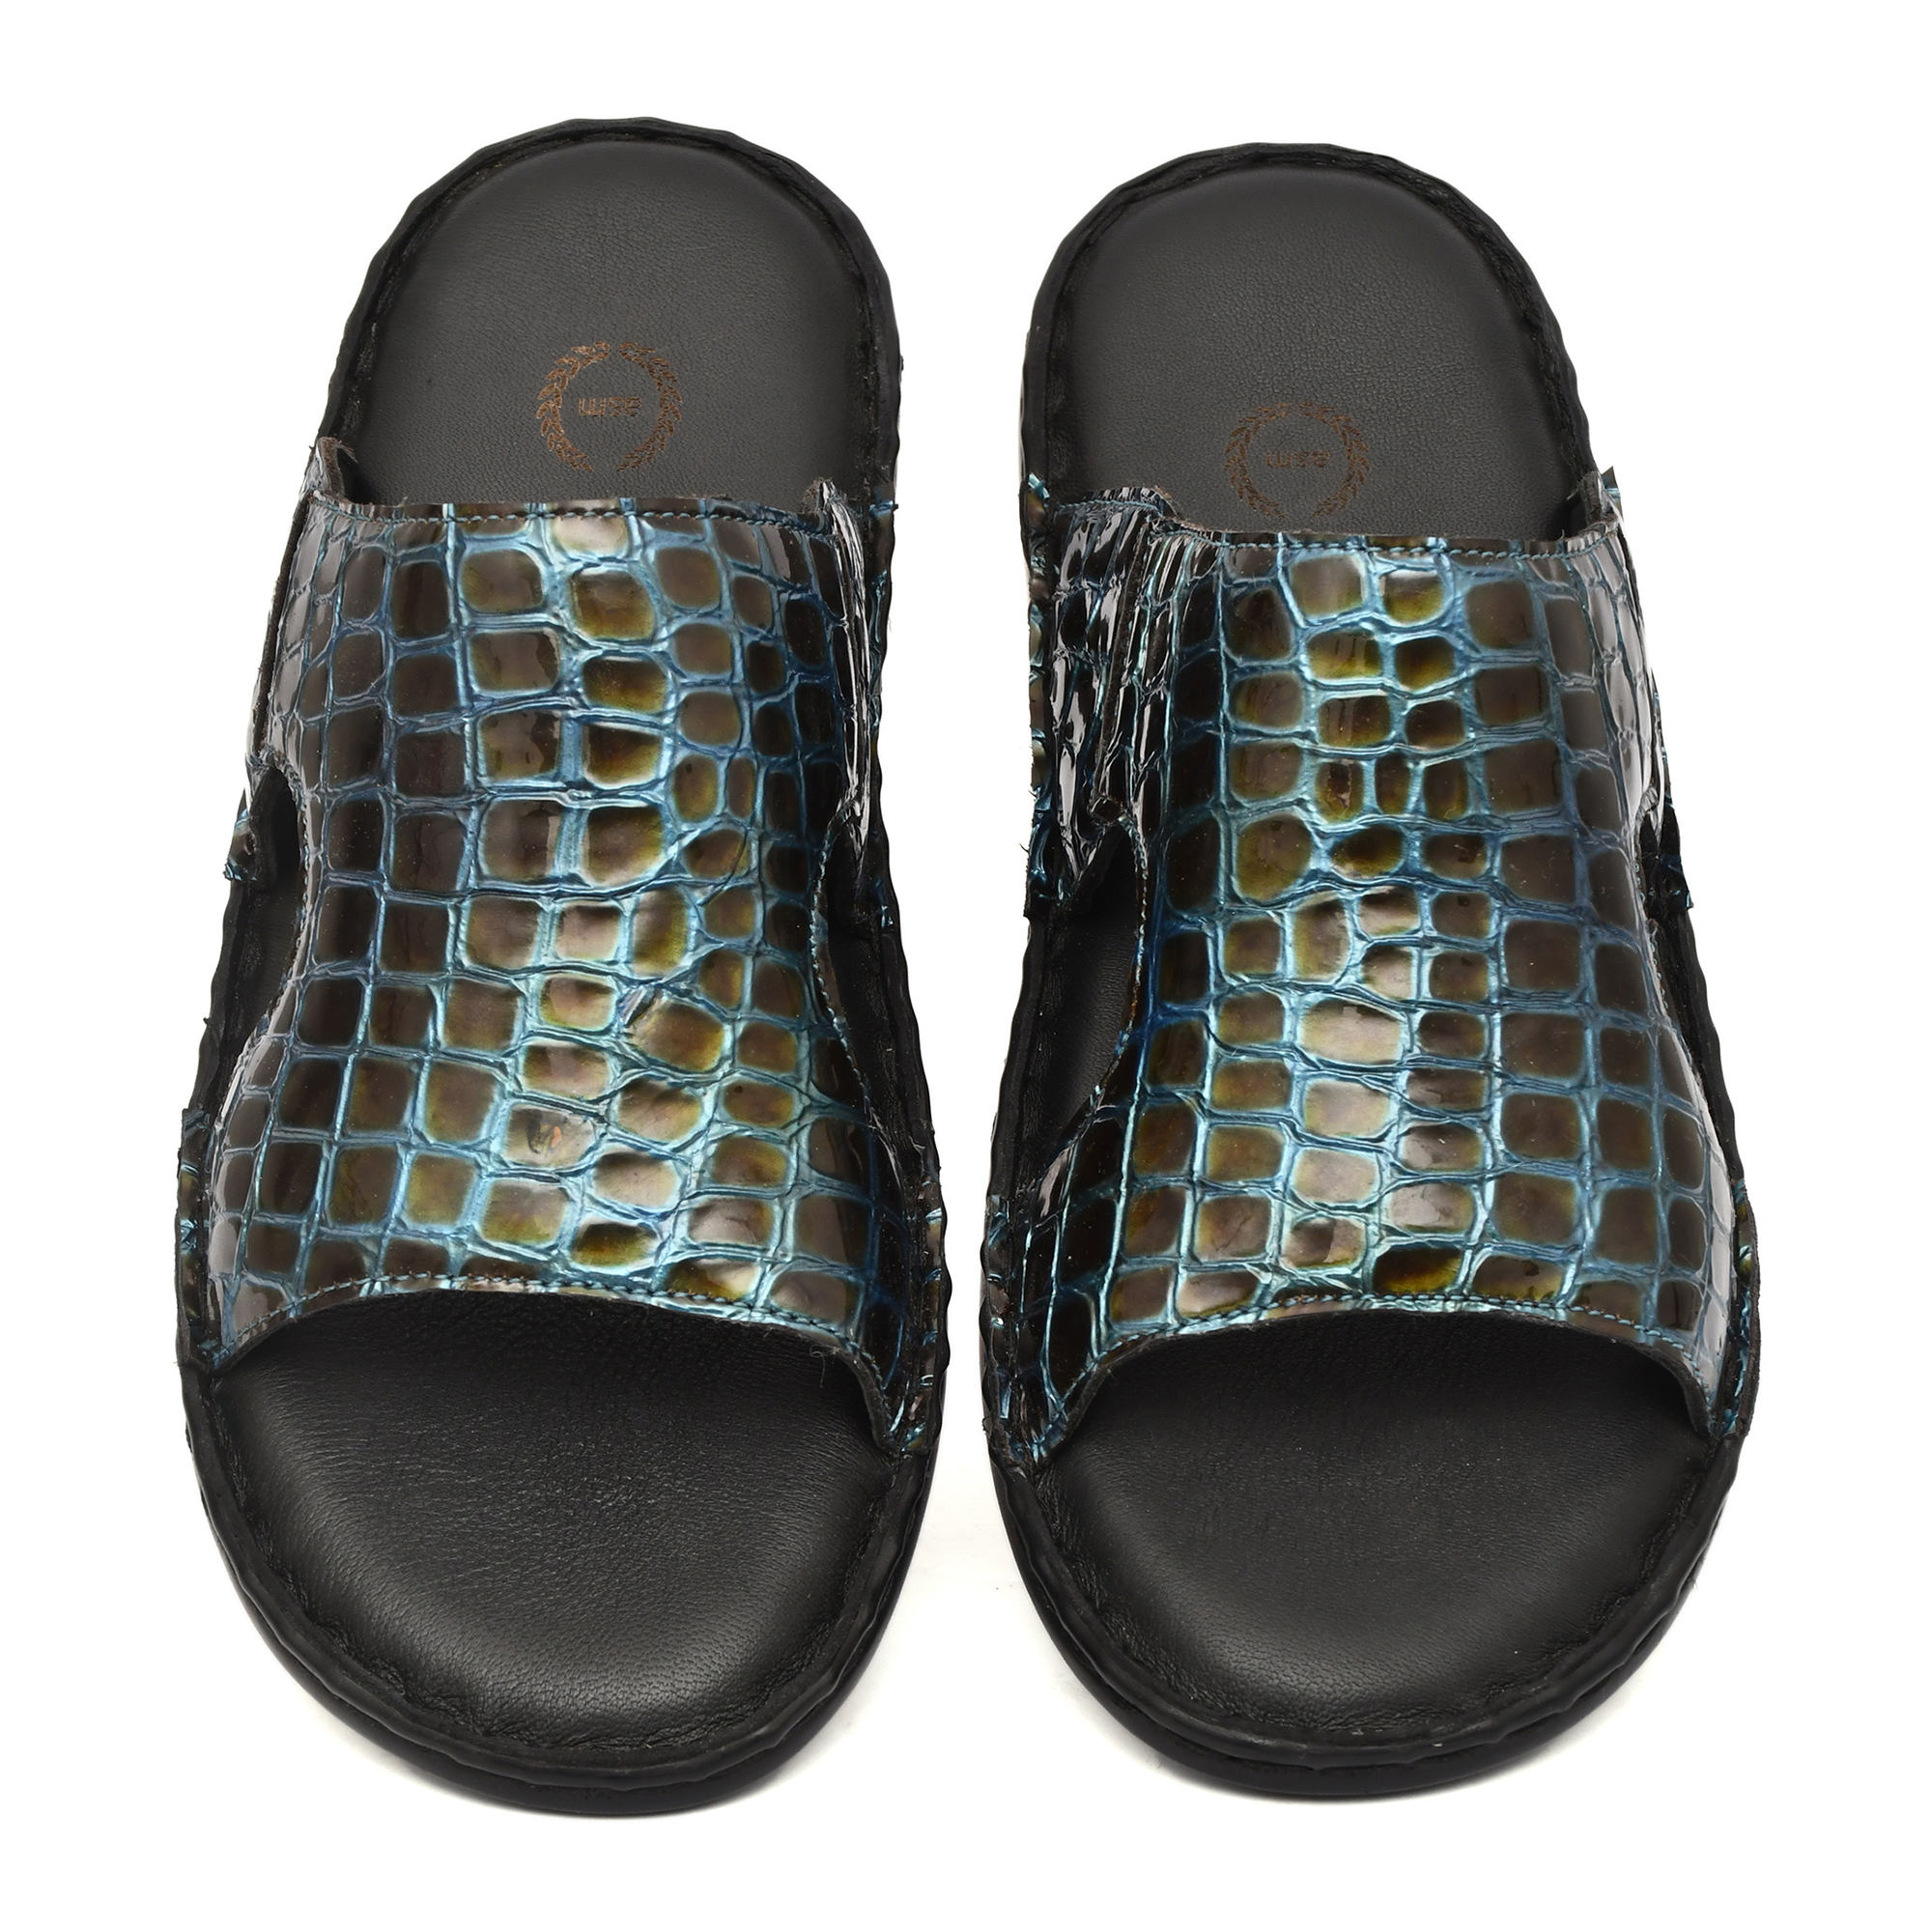 Turquoise Alligator Embossed Leather Slippers for Men with Memory foam footpad by asm.